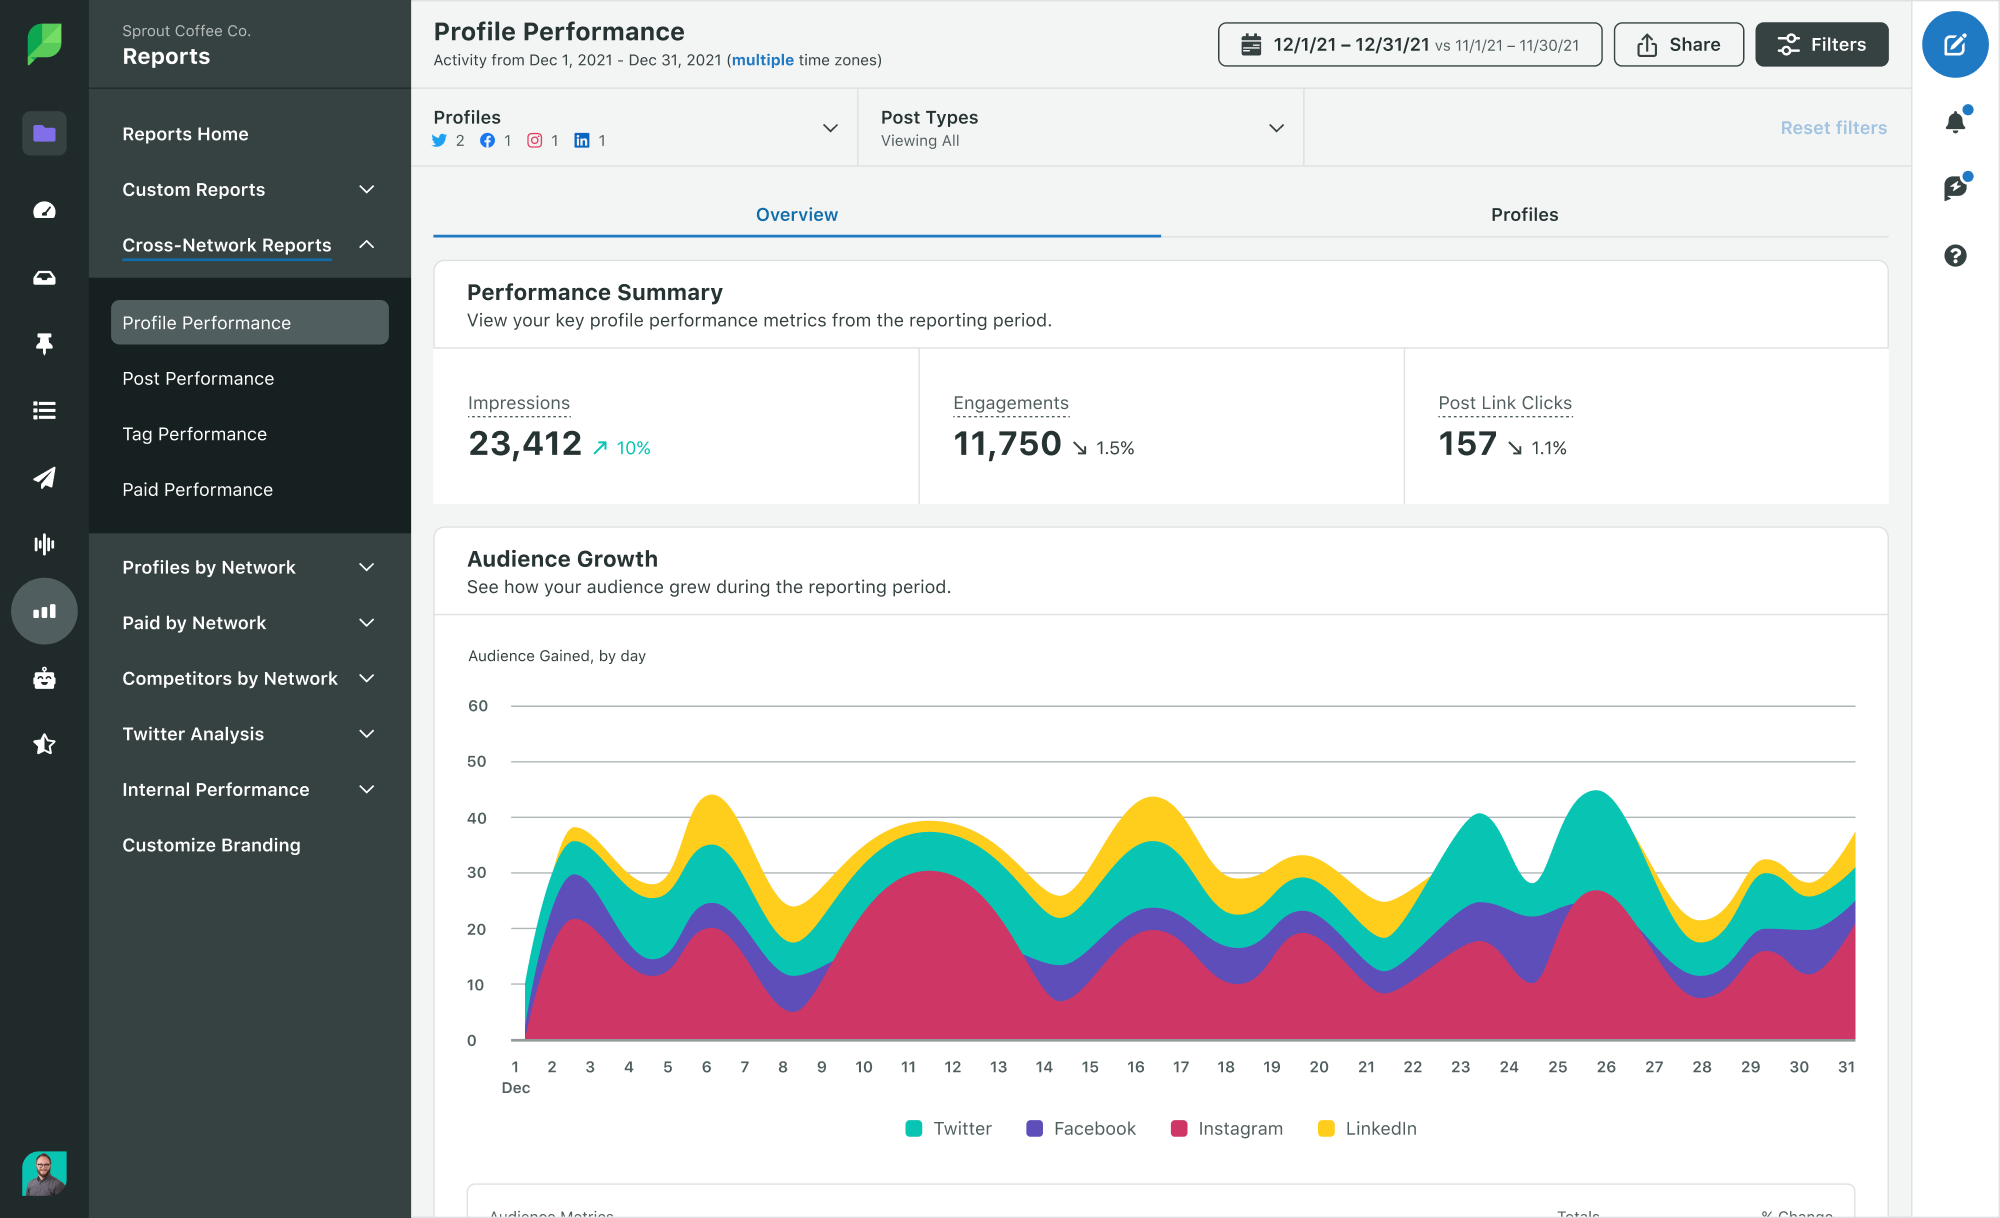 A screenshot of the Profile Performance Report in Sprout's platform. In the image you can see the following metrics: impressions, engagements, post-link clicks and audience growth (which is charted in a colorful line graph).